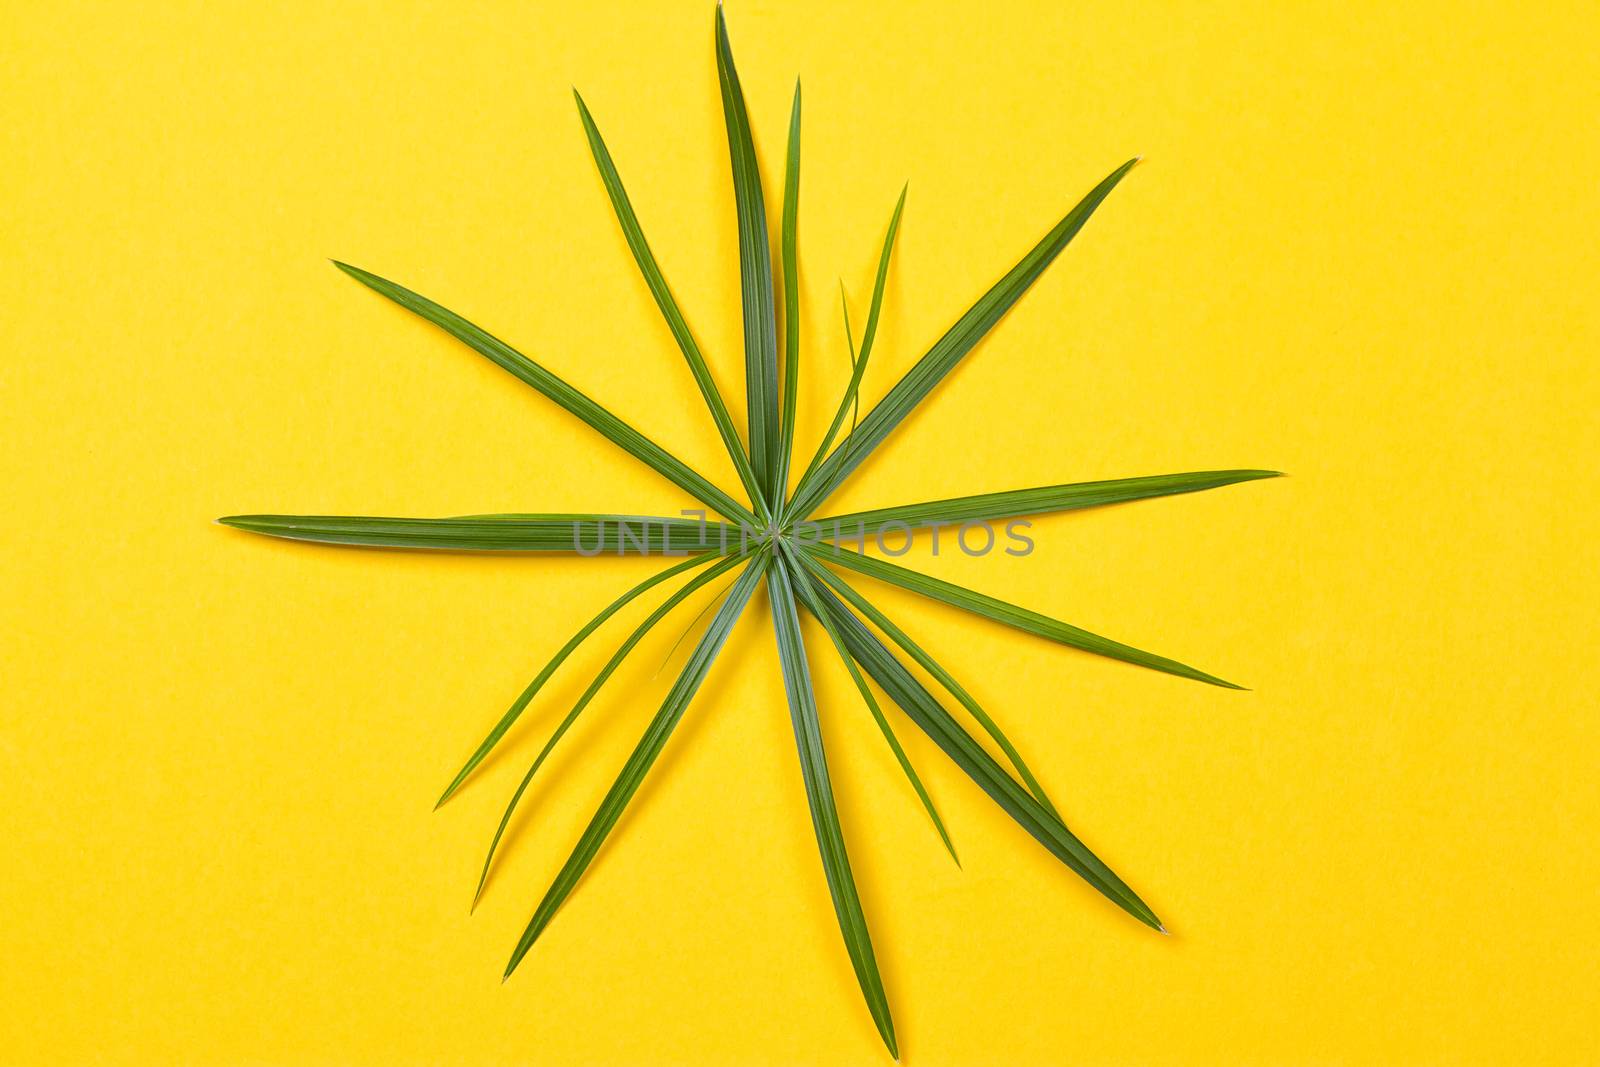 Tropical leaves on yellow background. minimal concept. Flat lay.